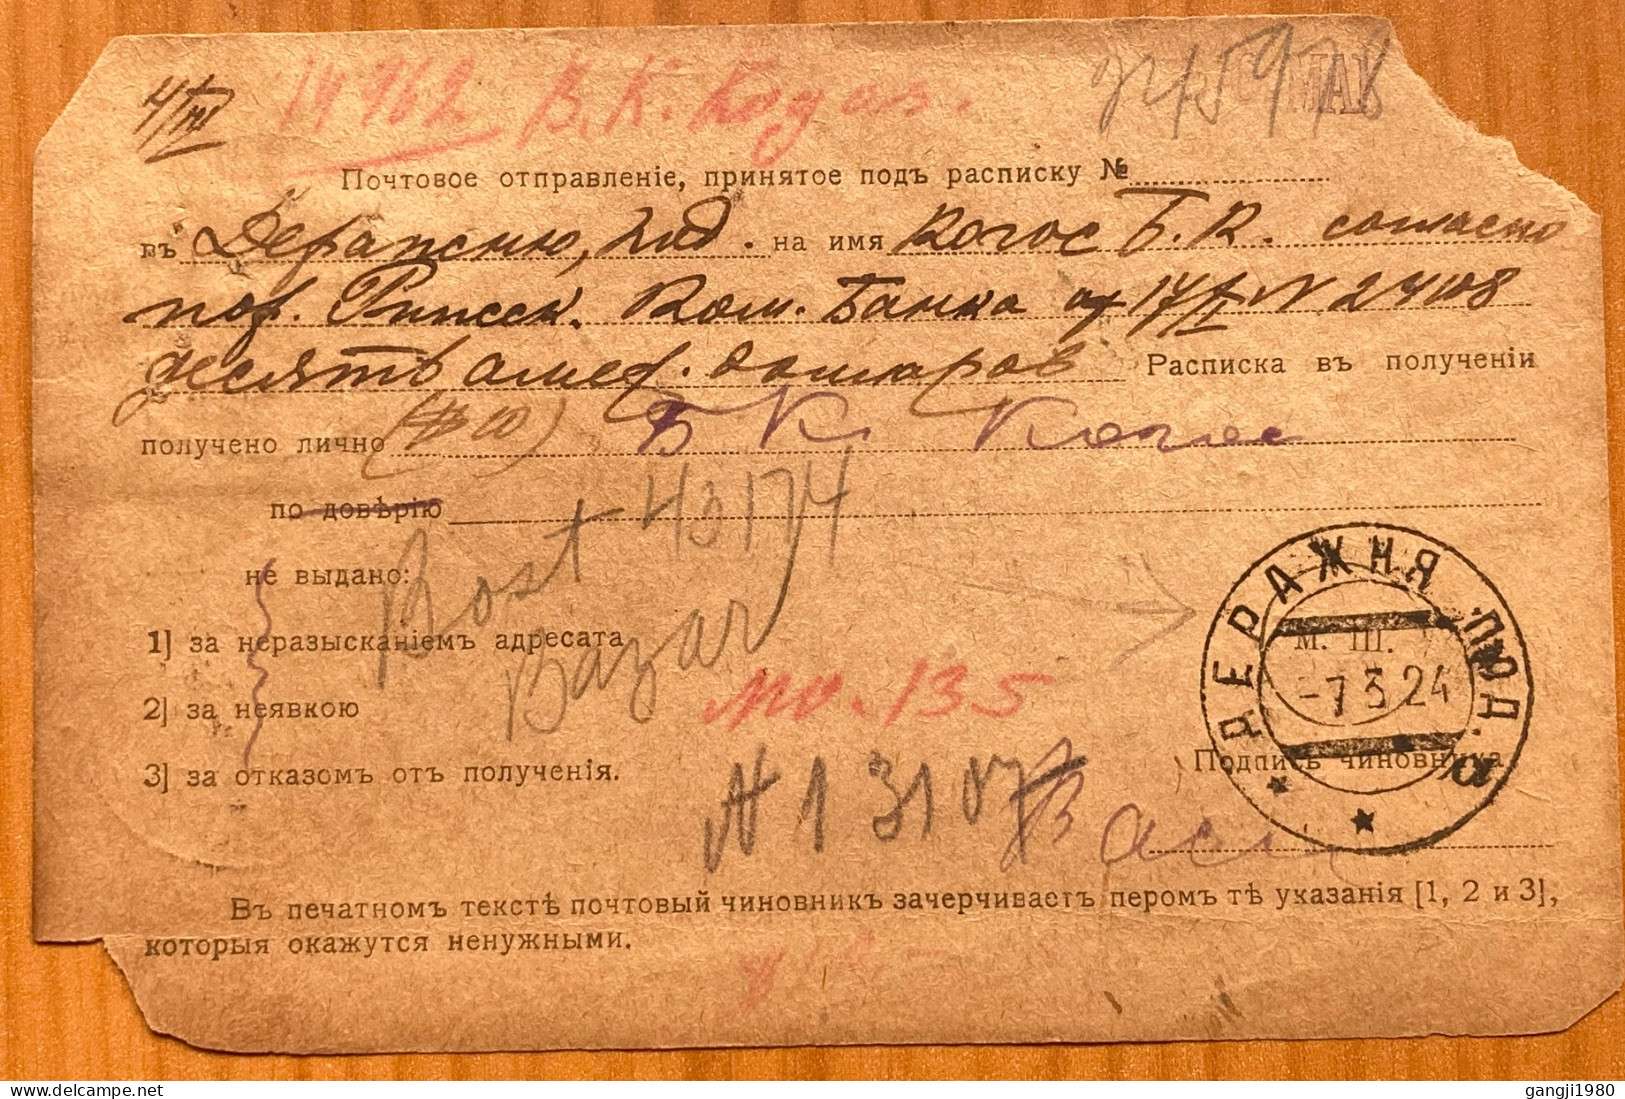 RUSSIA-1924, COVER CARD USED,  LENIN MOURNING IMPERF 6K  STAMP, AEPAXHA, KAMEHE  DEPAZHH.  4  CITY CANCEL - Lettres & Documents